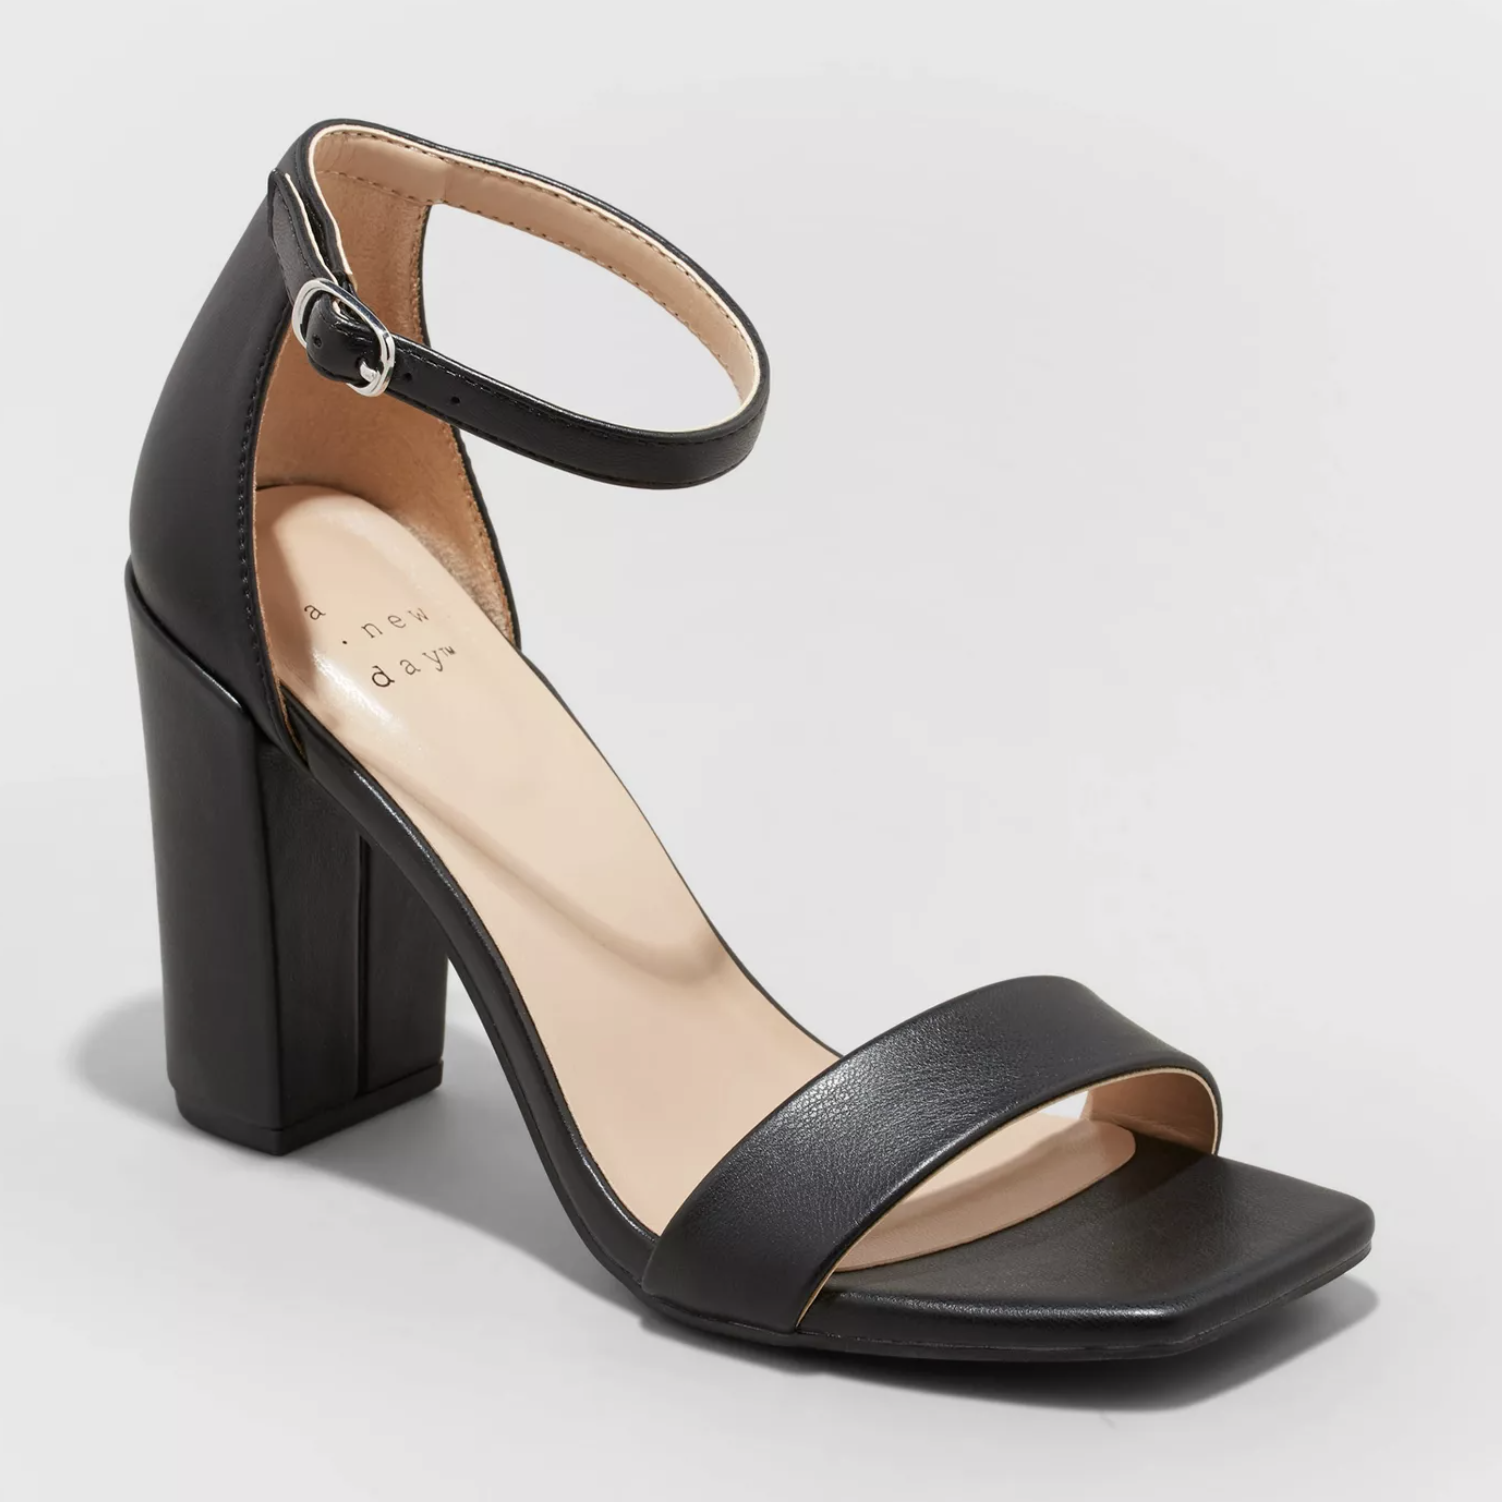 The black heels with a square toe and block heel